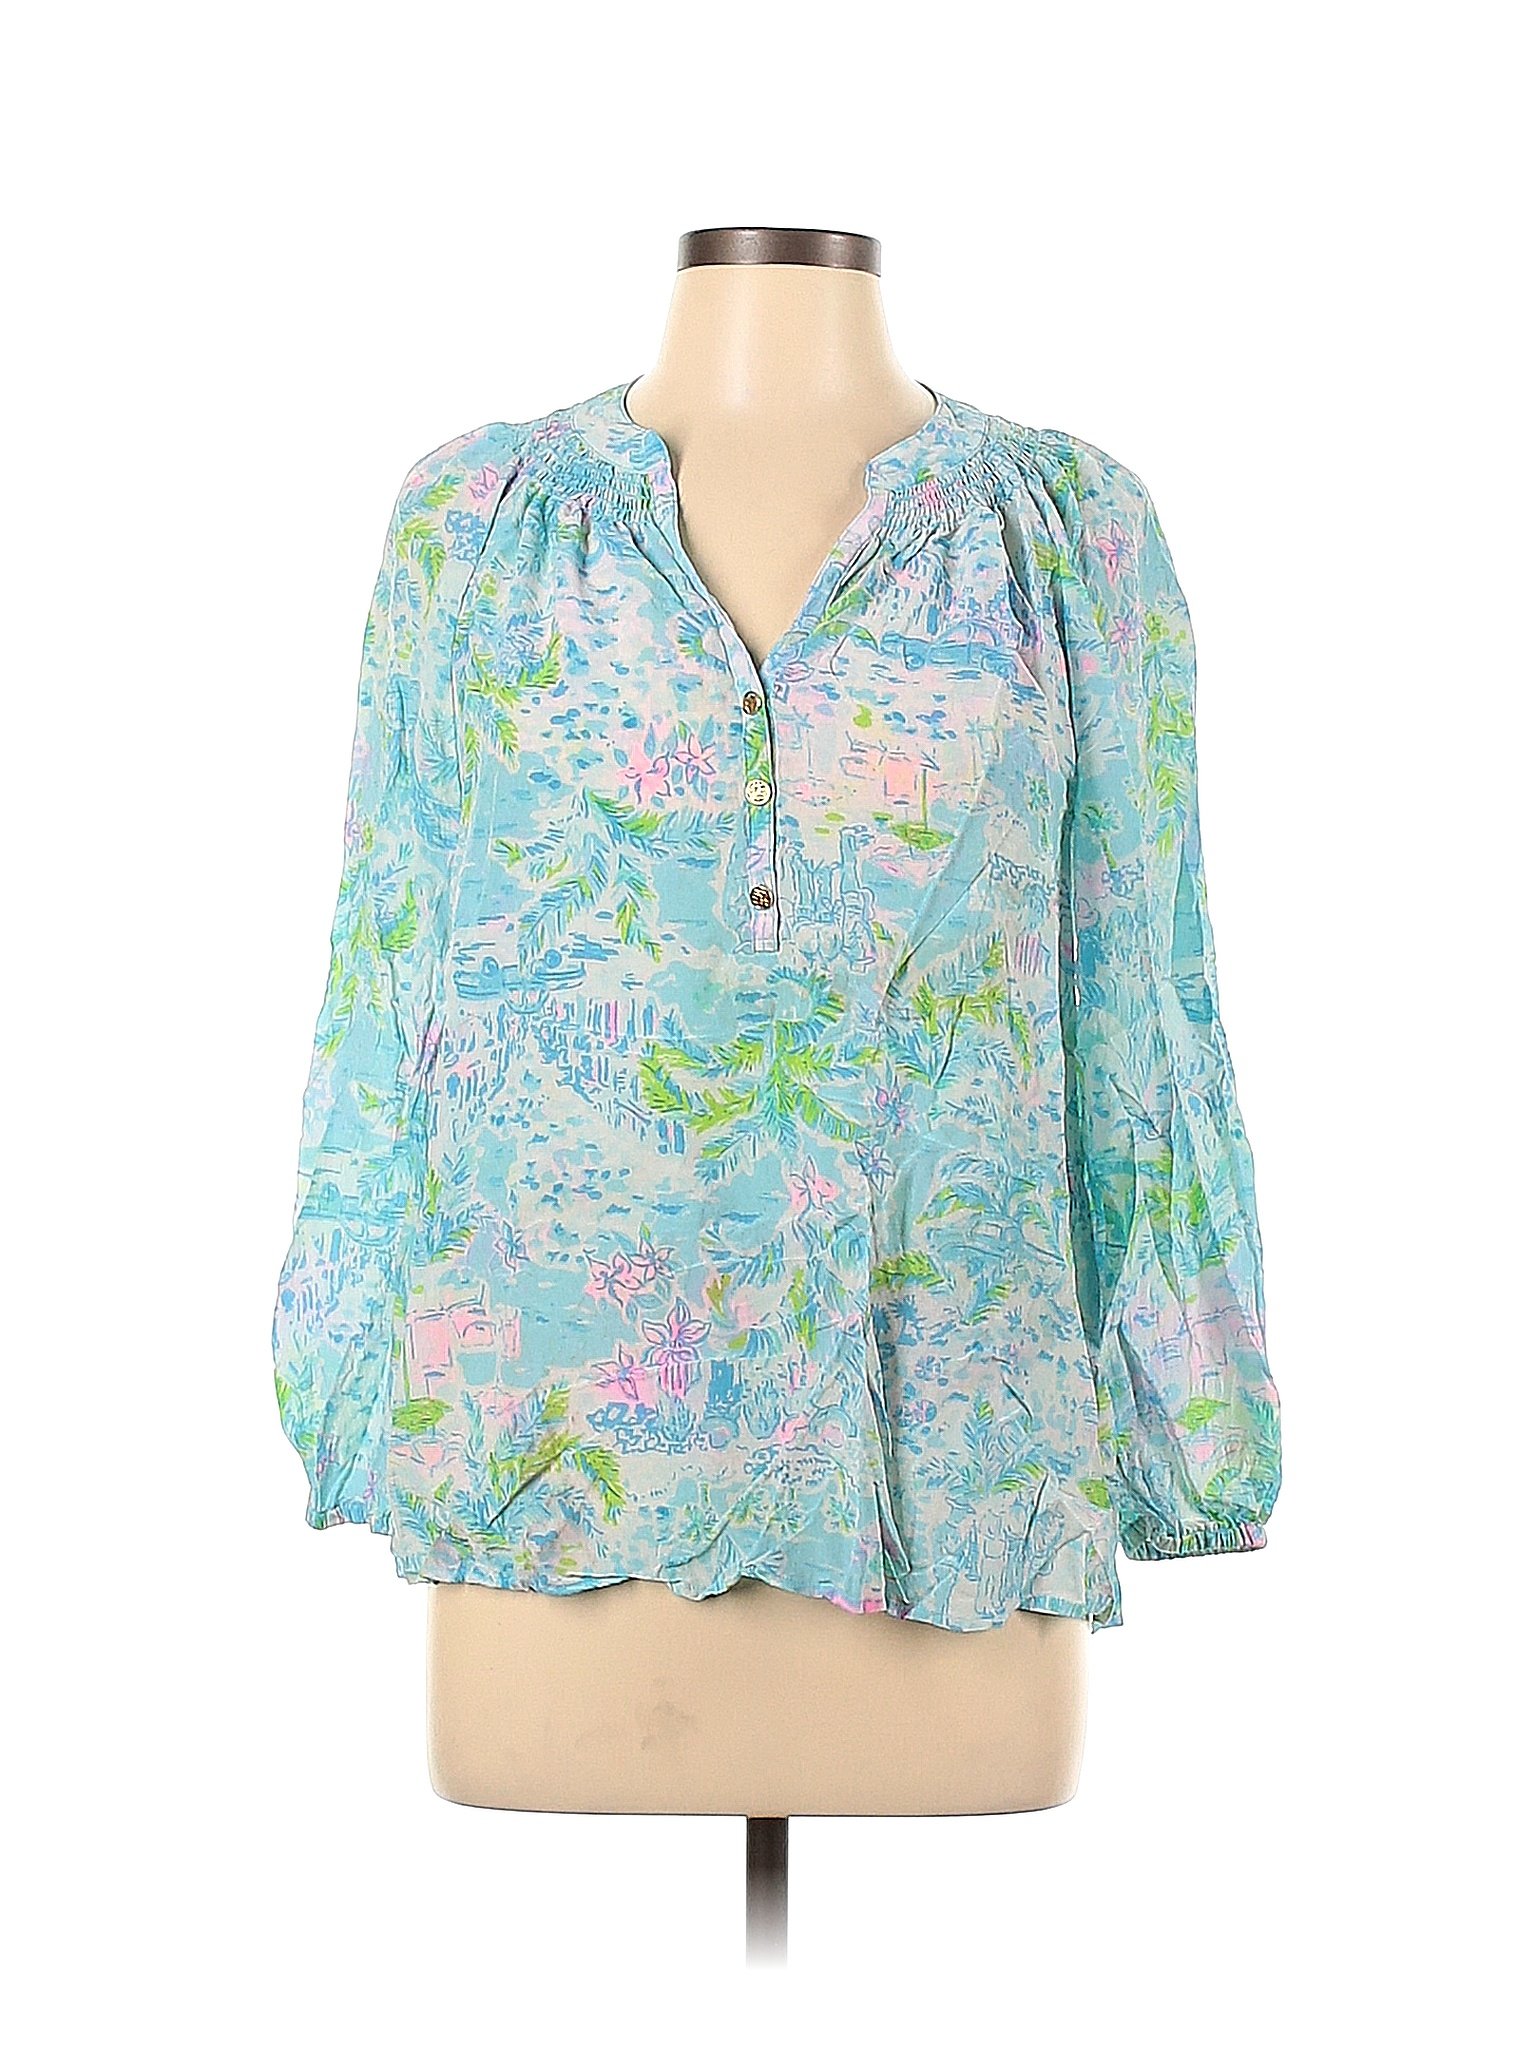 Lilly Pulitzer 100% Silk Blue Long Sleeve Silk Top Size L - 66% off ...